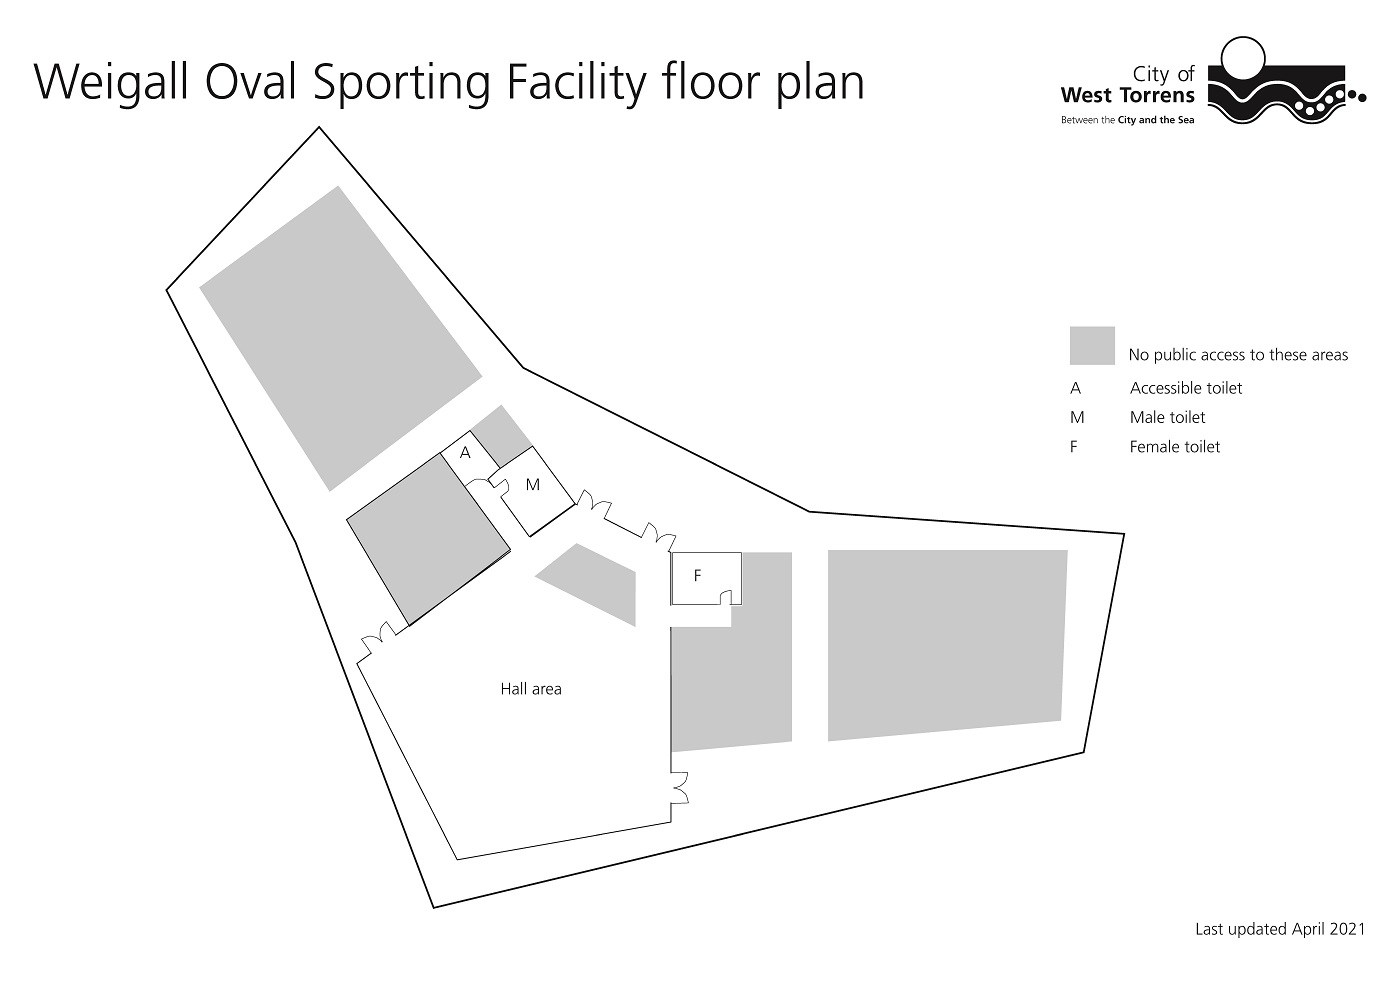 Weigall Oval Sporting Facility floor plan